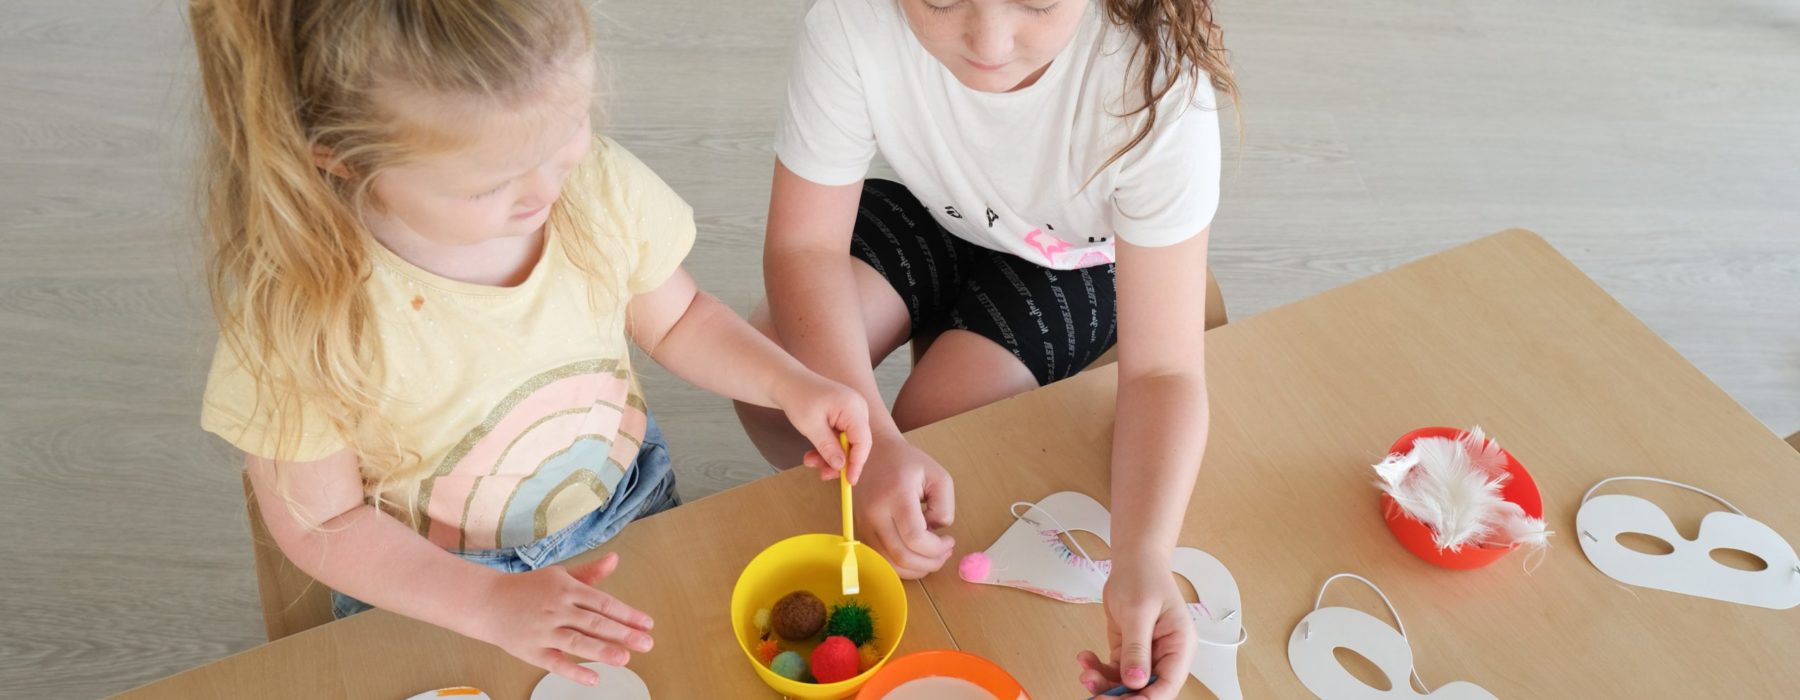 two young children are painting on a table while stiting down